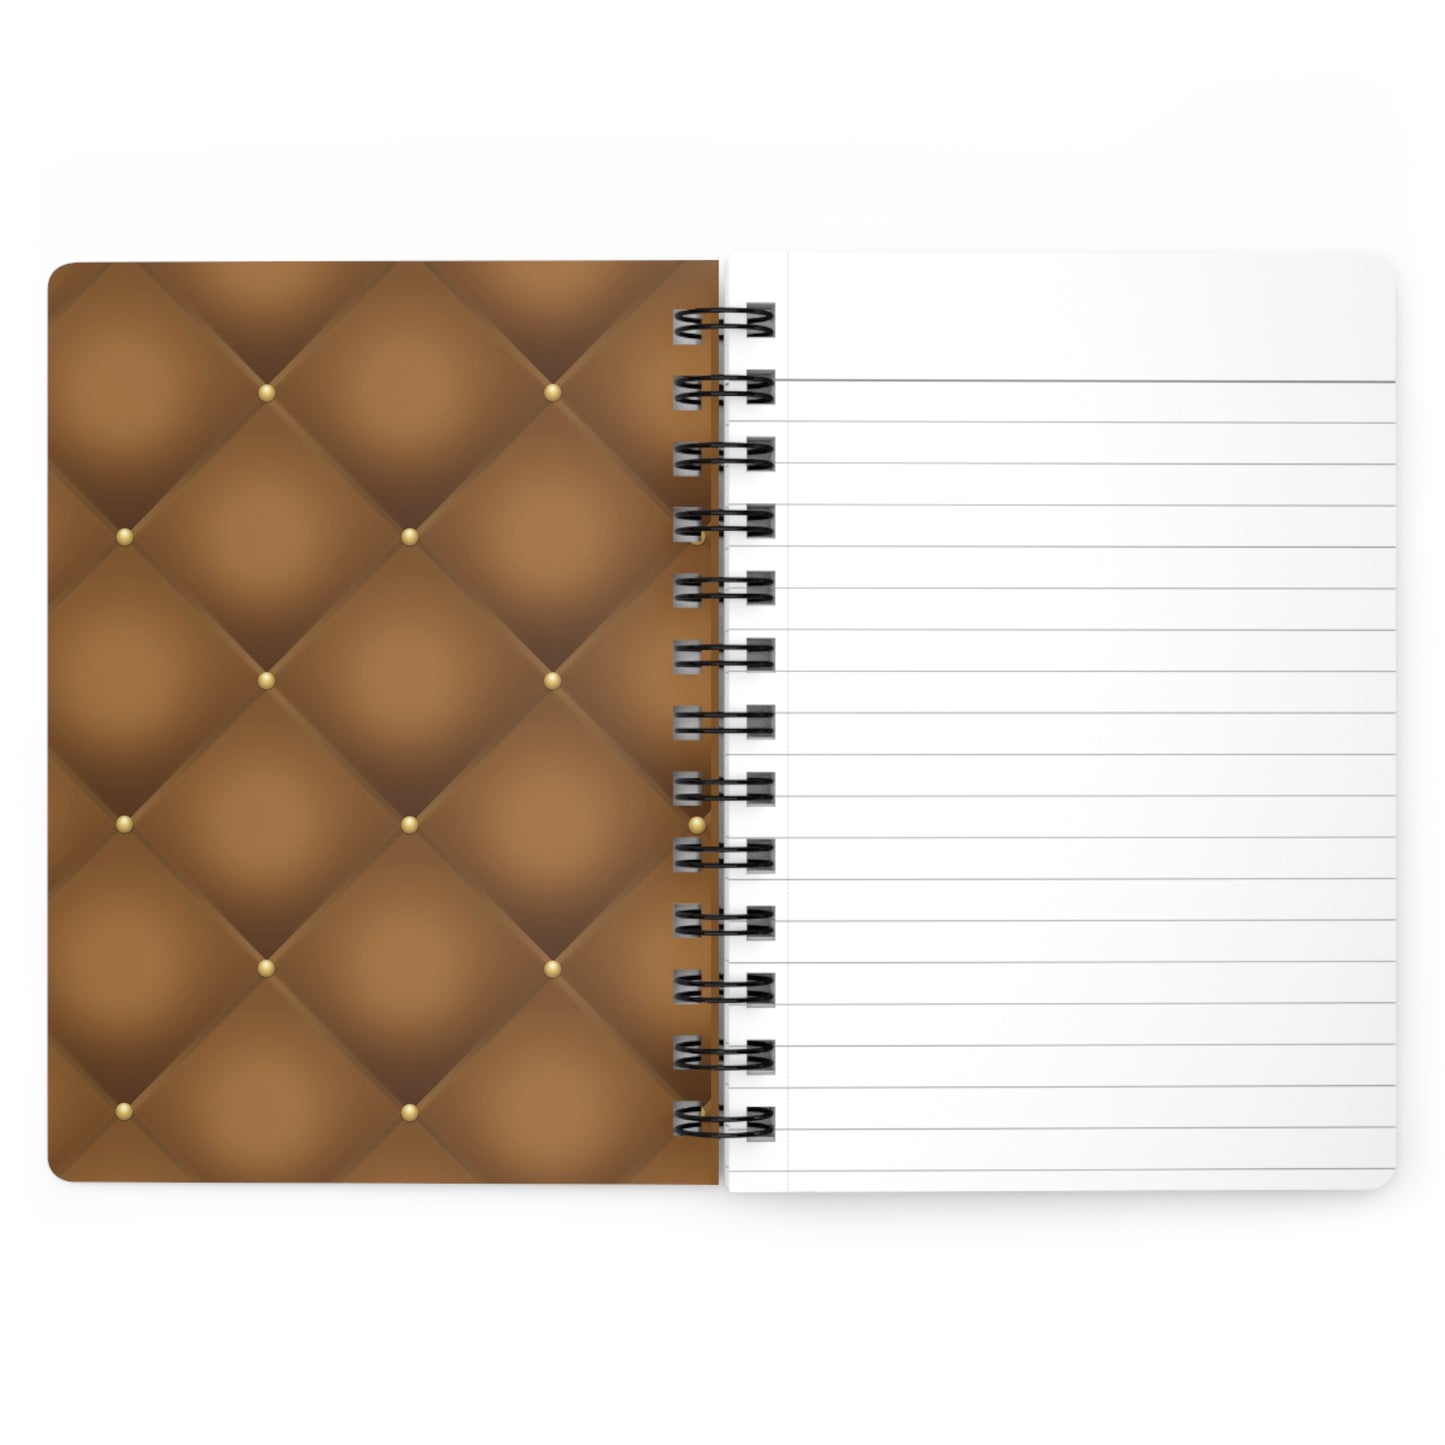 Stop for one minute Tufted Print Dark Moderate Orange and Gold Spiral Bound Journal